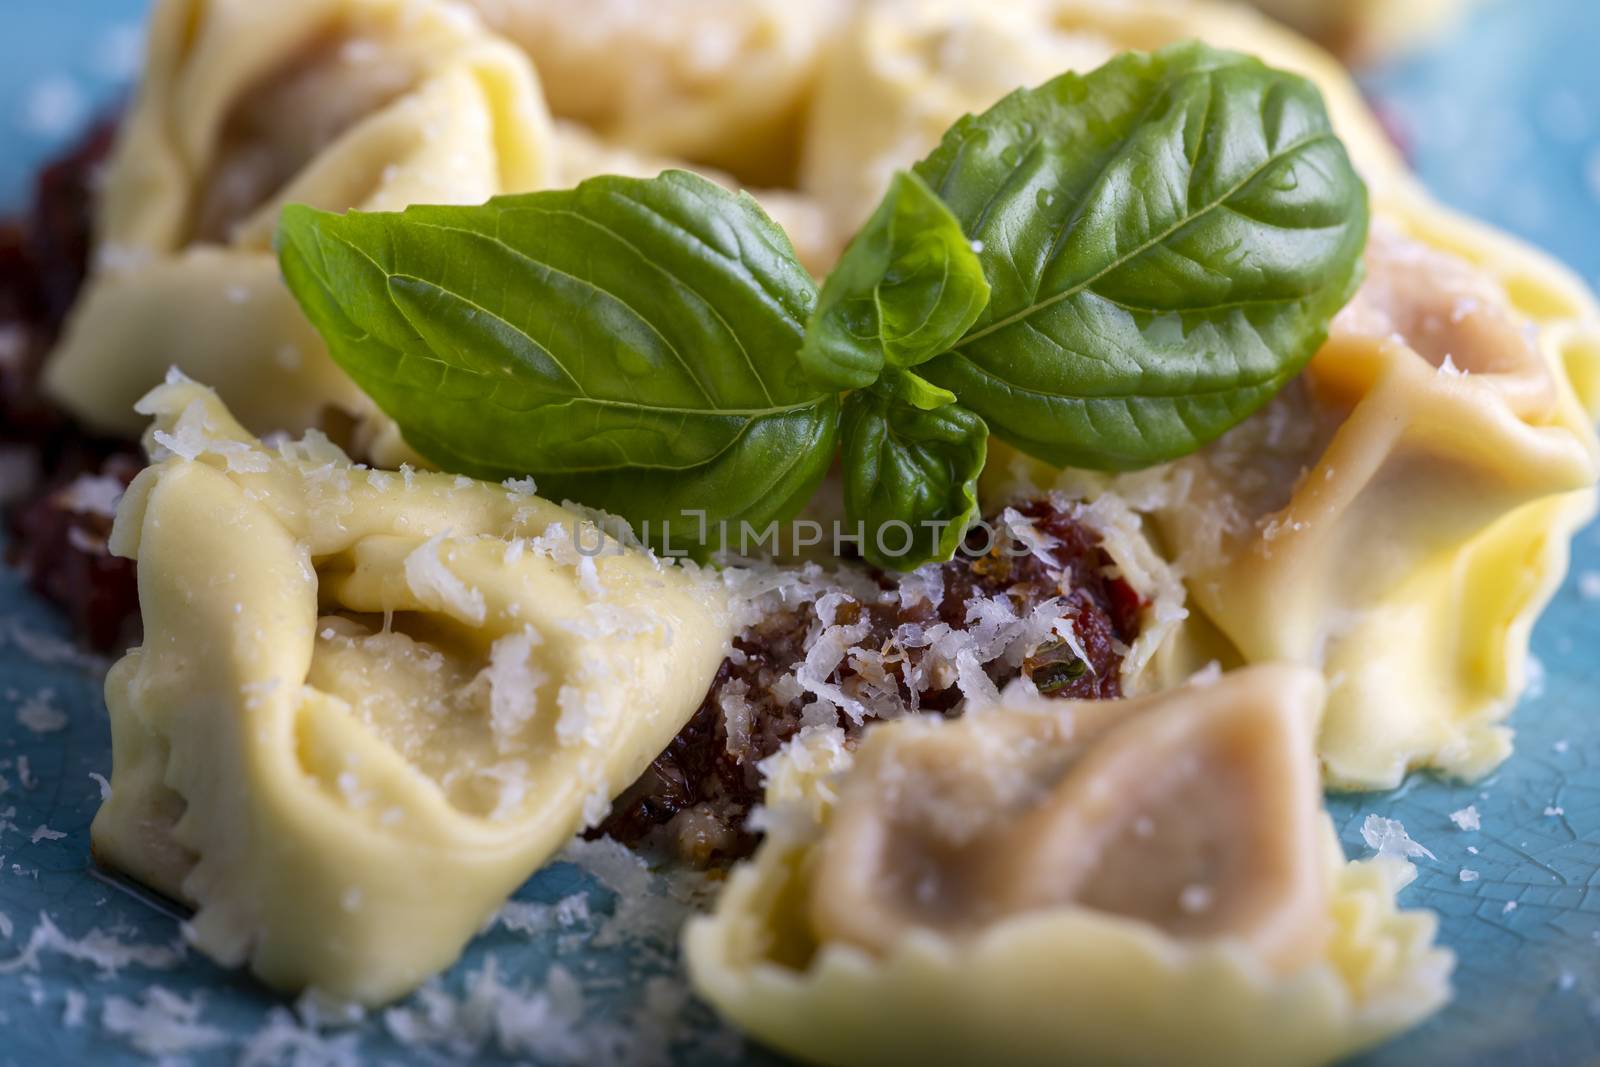 tortellini with olive oil on a blue plate